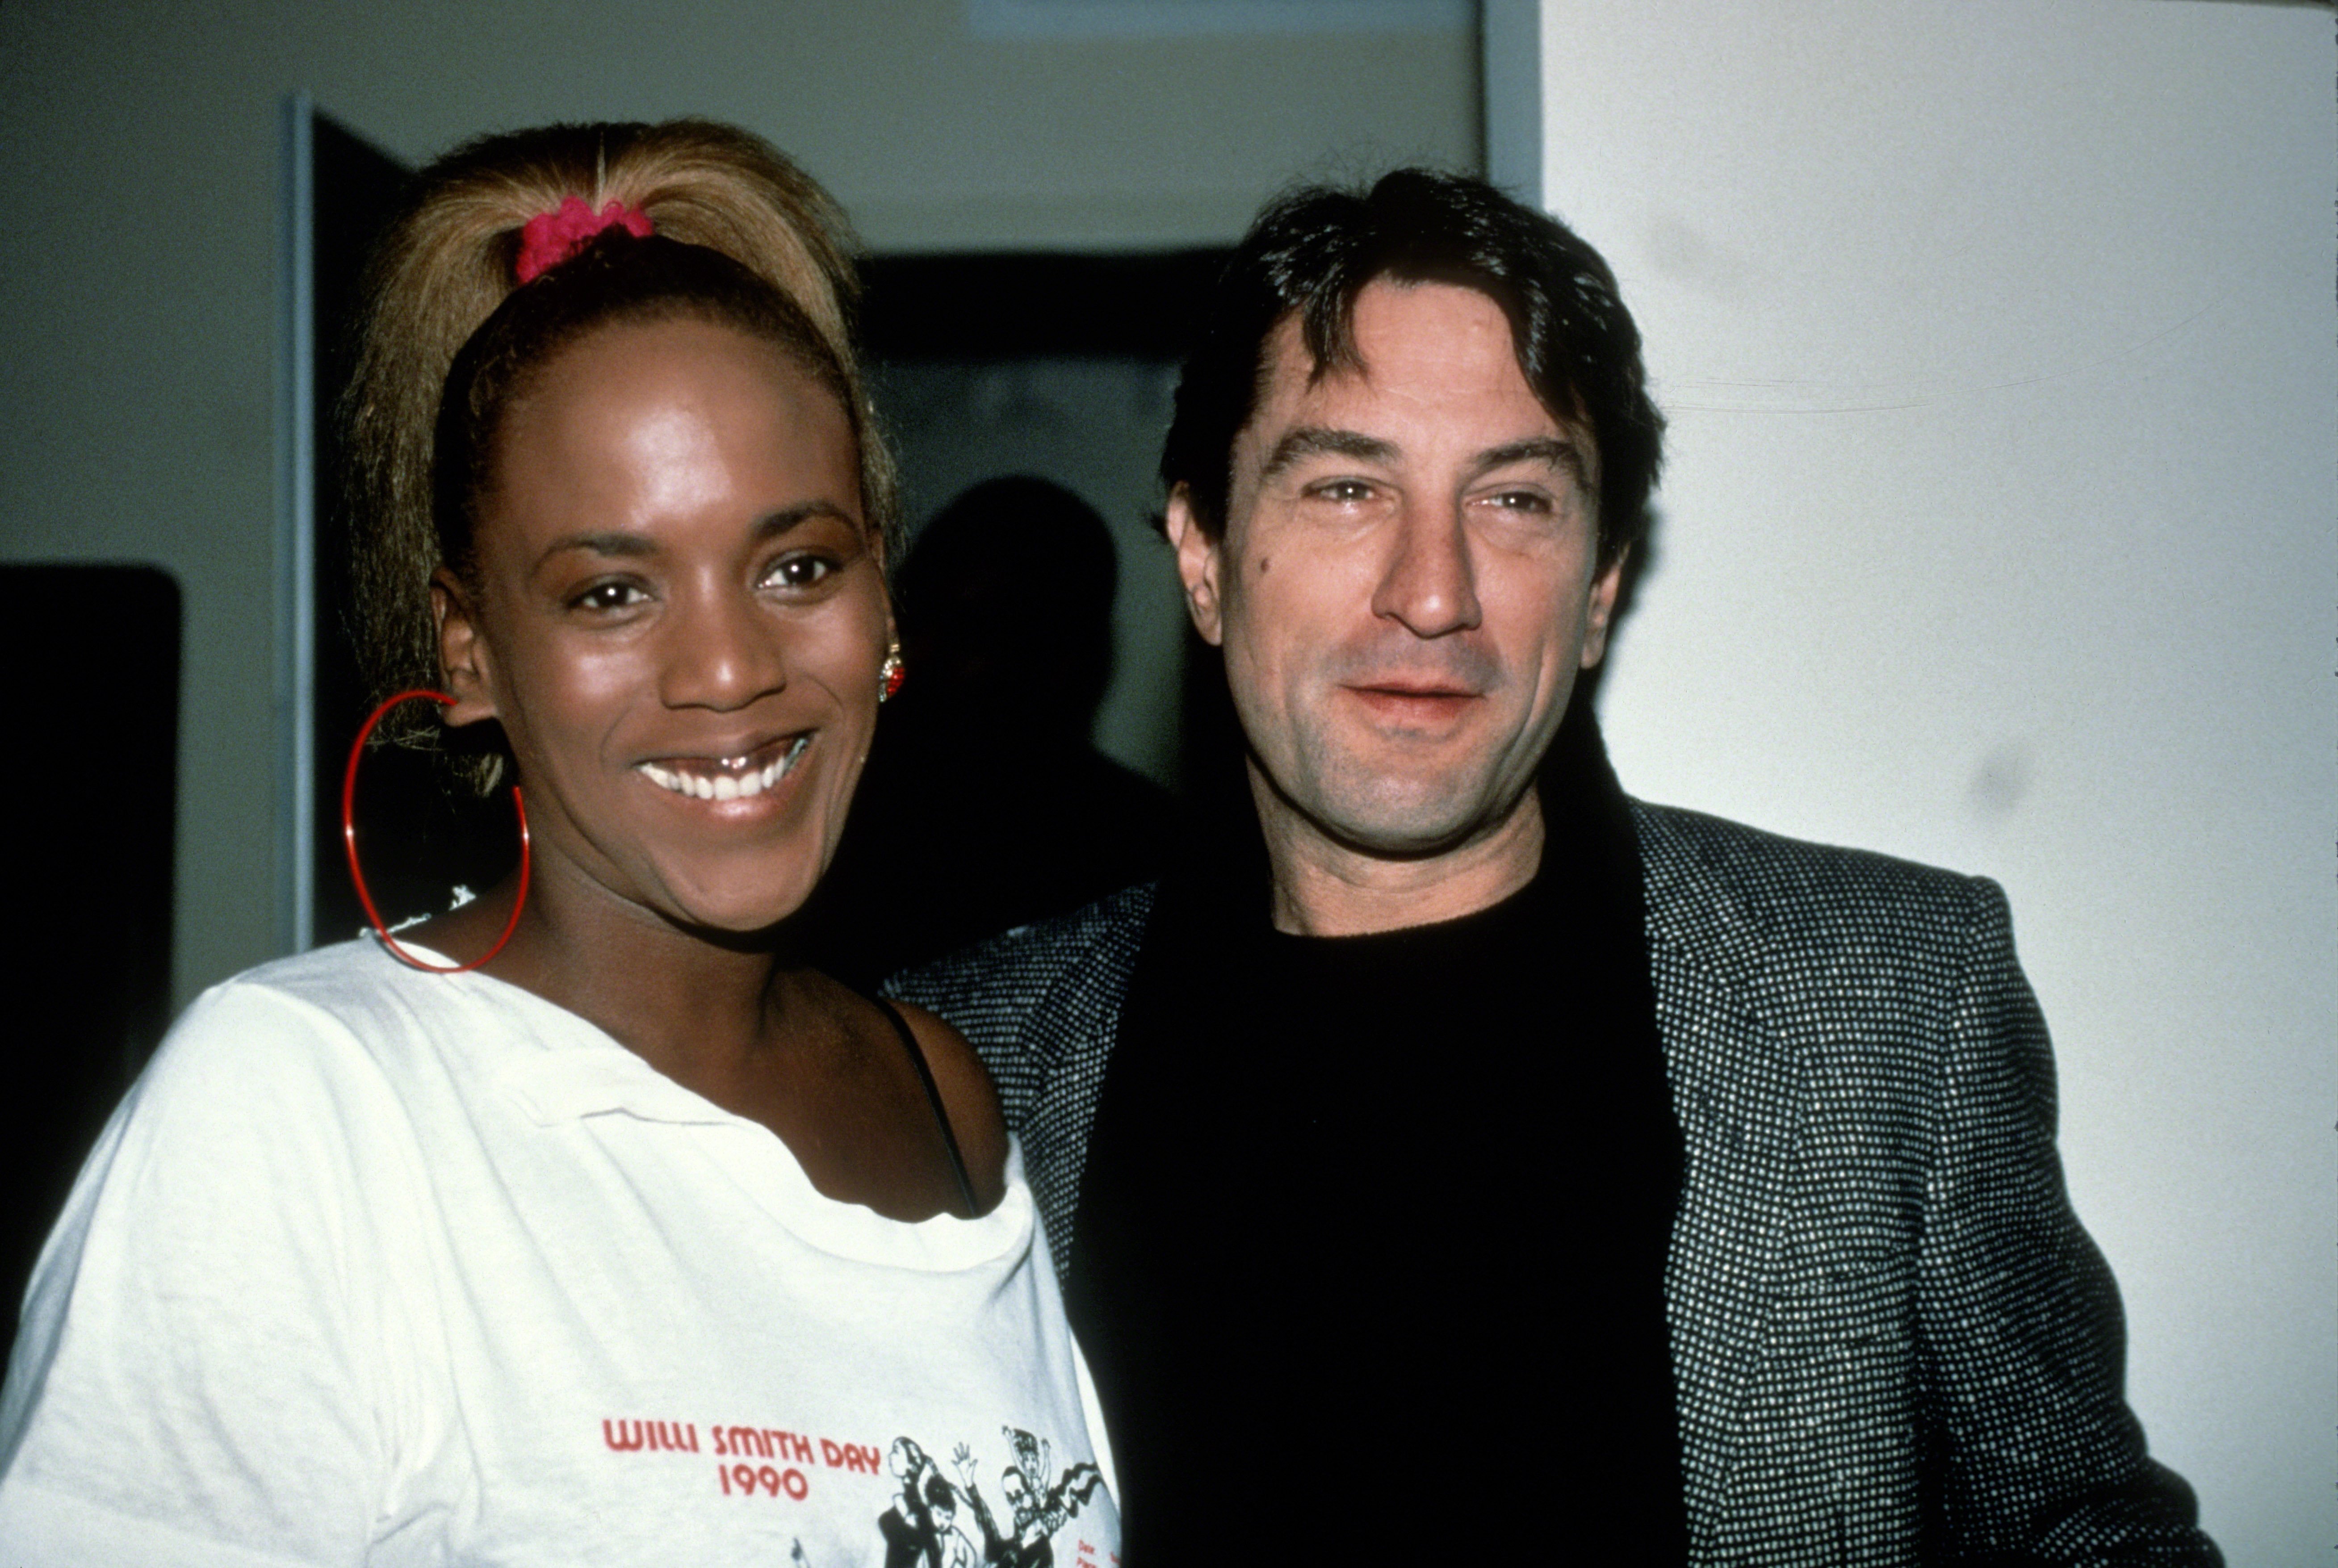 Robert De Niro pictured with longtime girlfriend and actress Toukie Smith in 1990 in New York City | Source: Getty Images